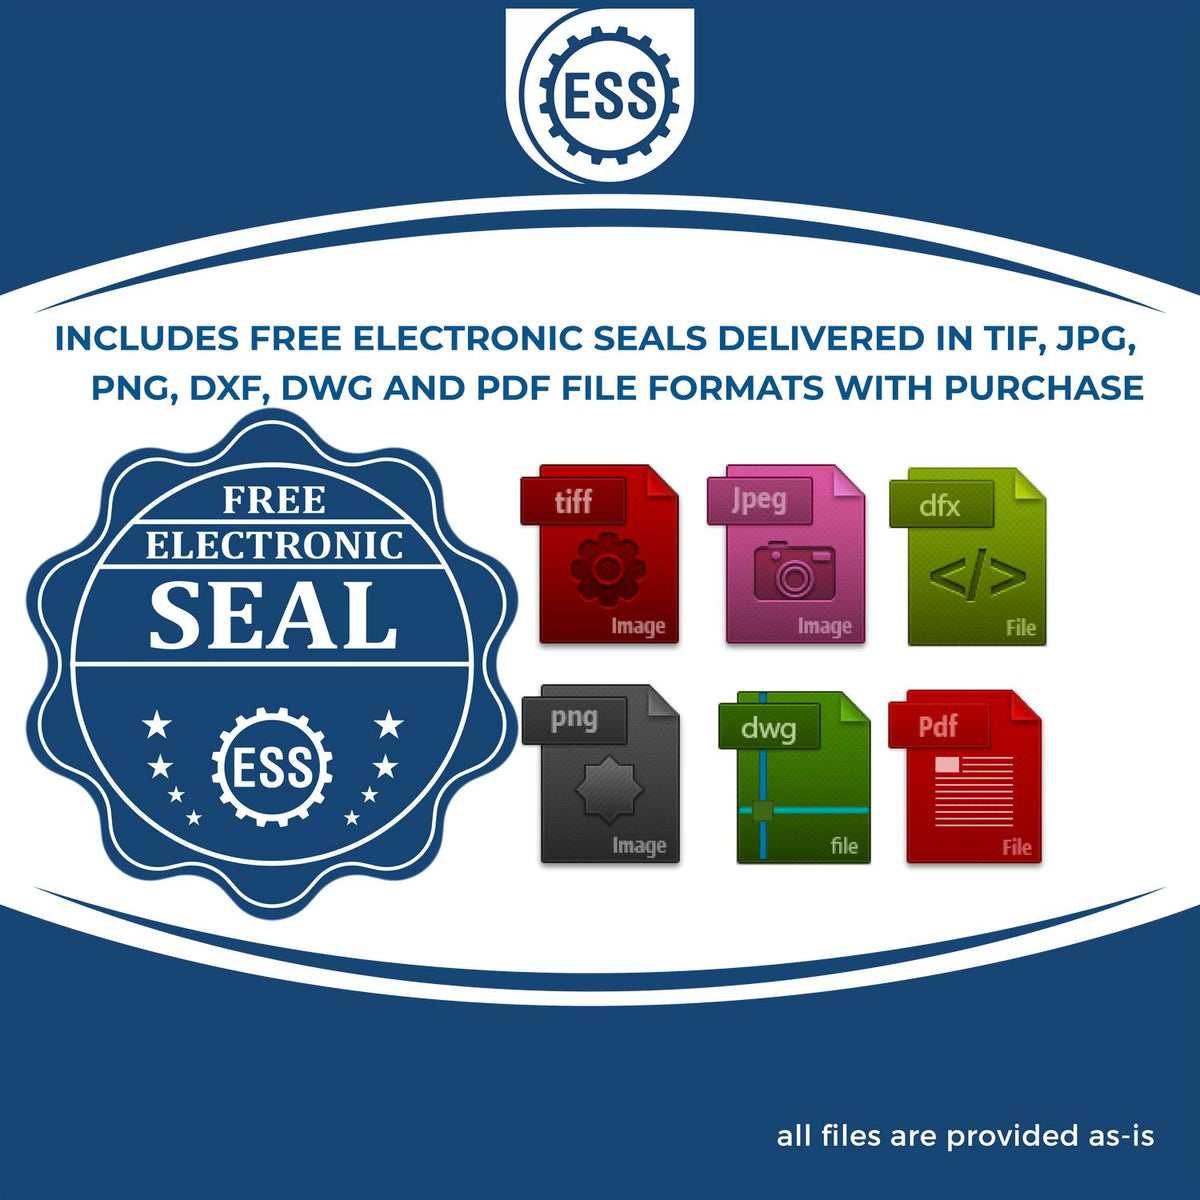 An infographic for the free electronic seal for the Long Reach Iowa PE Seal illustrating the different file type icons such as DXF, DWG, TIF, JPG and PNG.